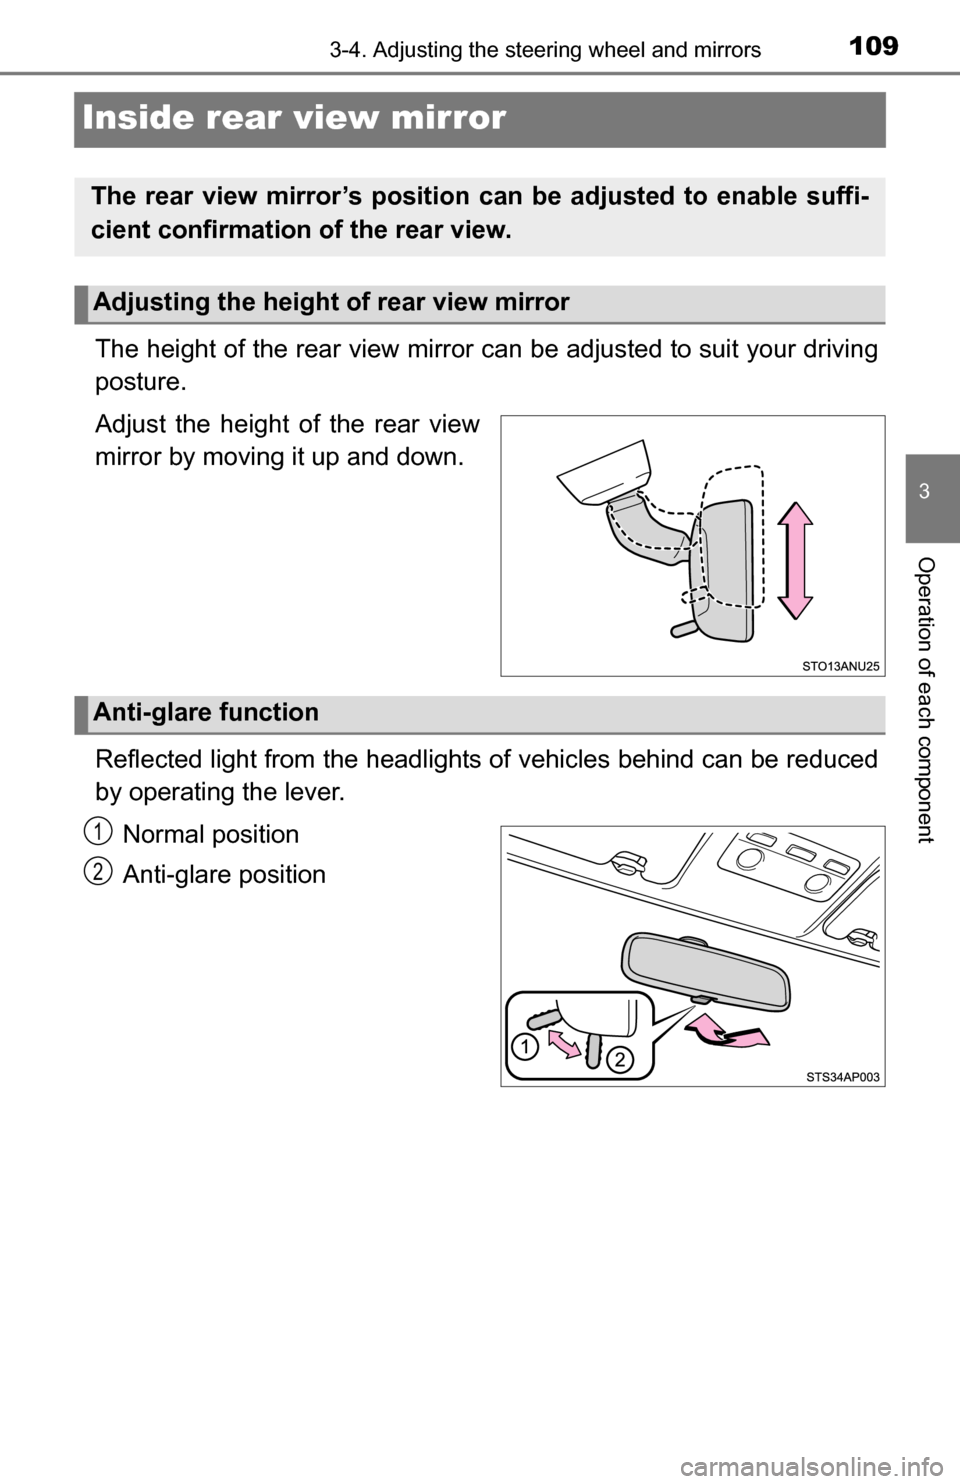 TOYOTA YARIS 2016 3.G Owners Manual 1093-4. Adjusting the steering wheel and mirrors
3
Operation of each component
Inside rear view mirror
The height of the rear view mirror can be adjusted to suit your driving
posture.
Adjust the heigh